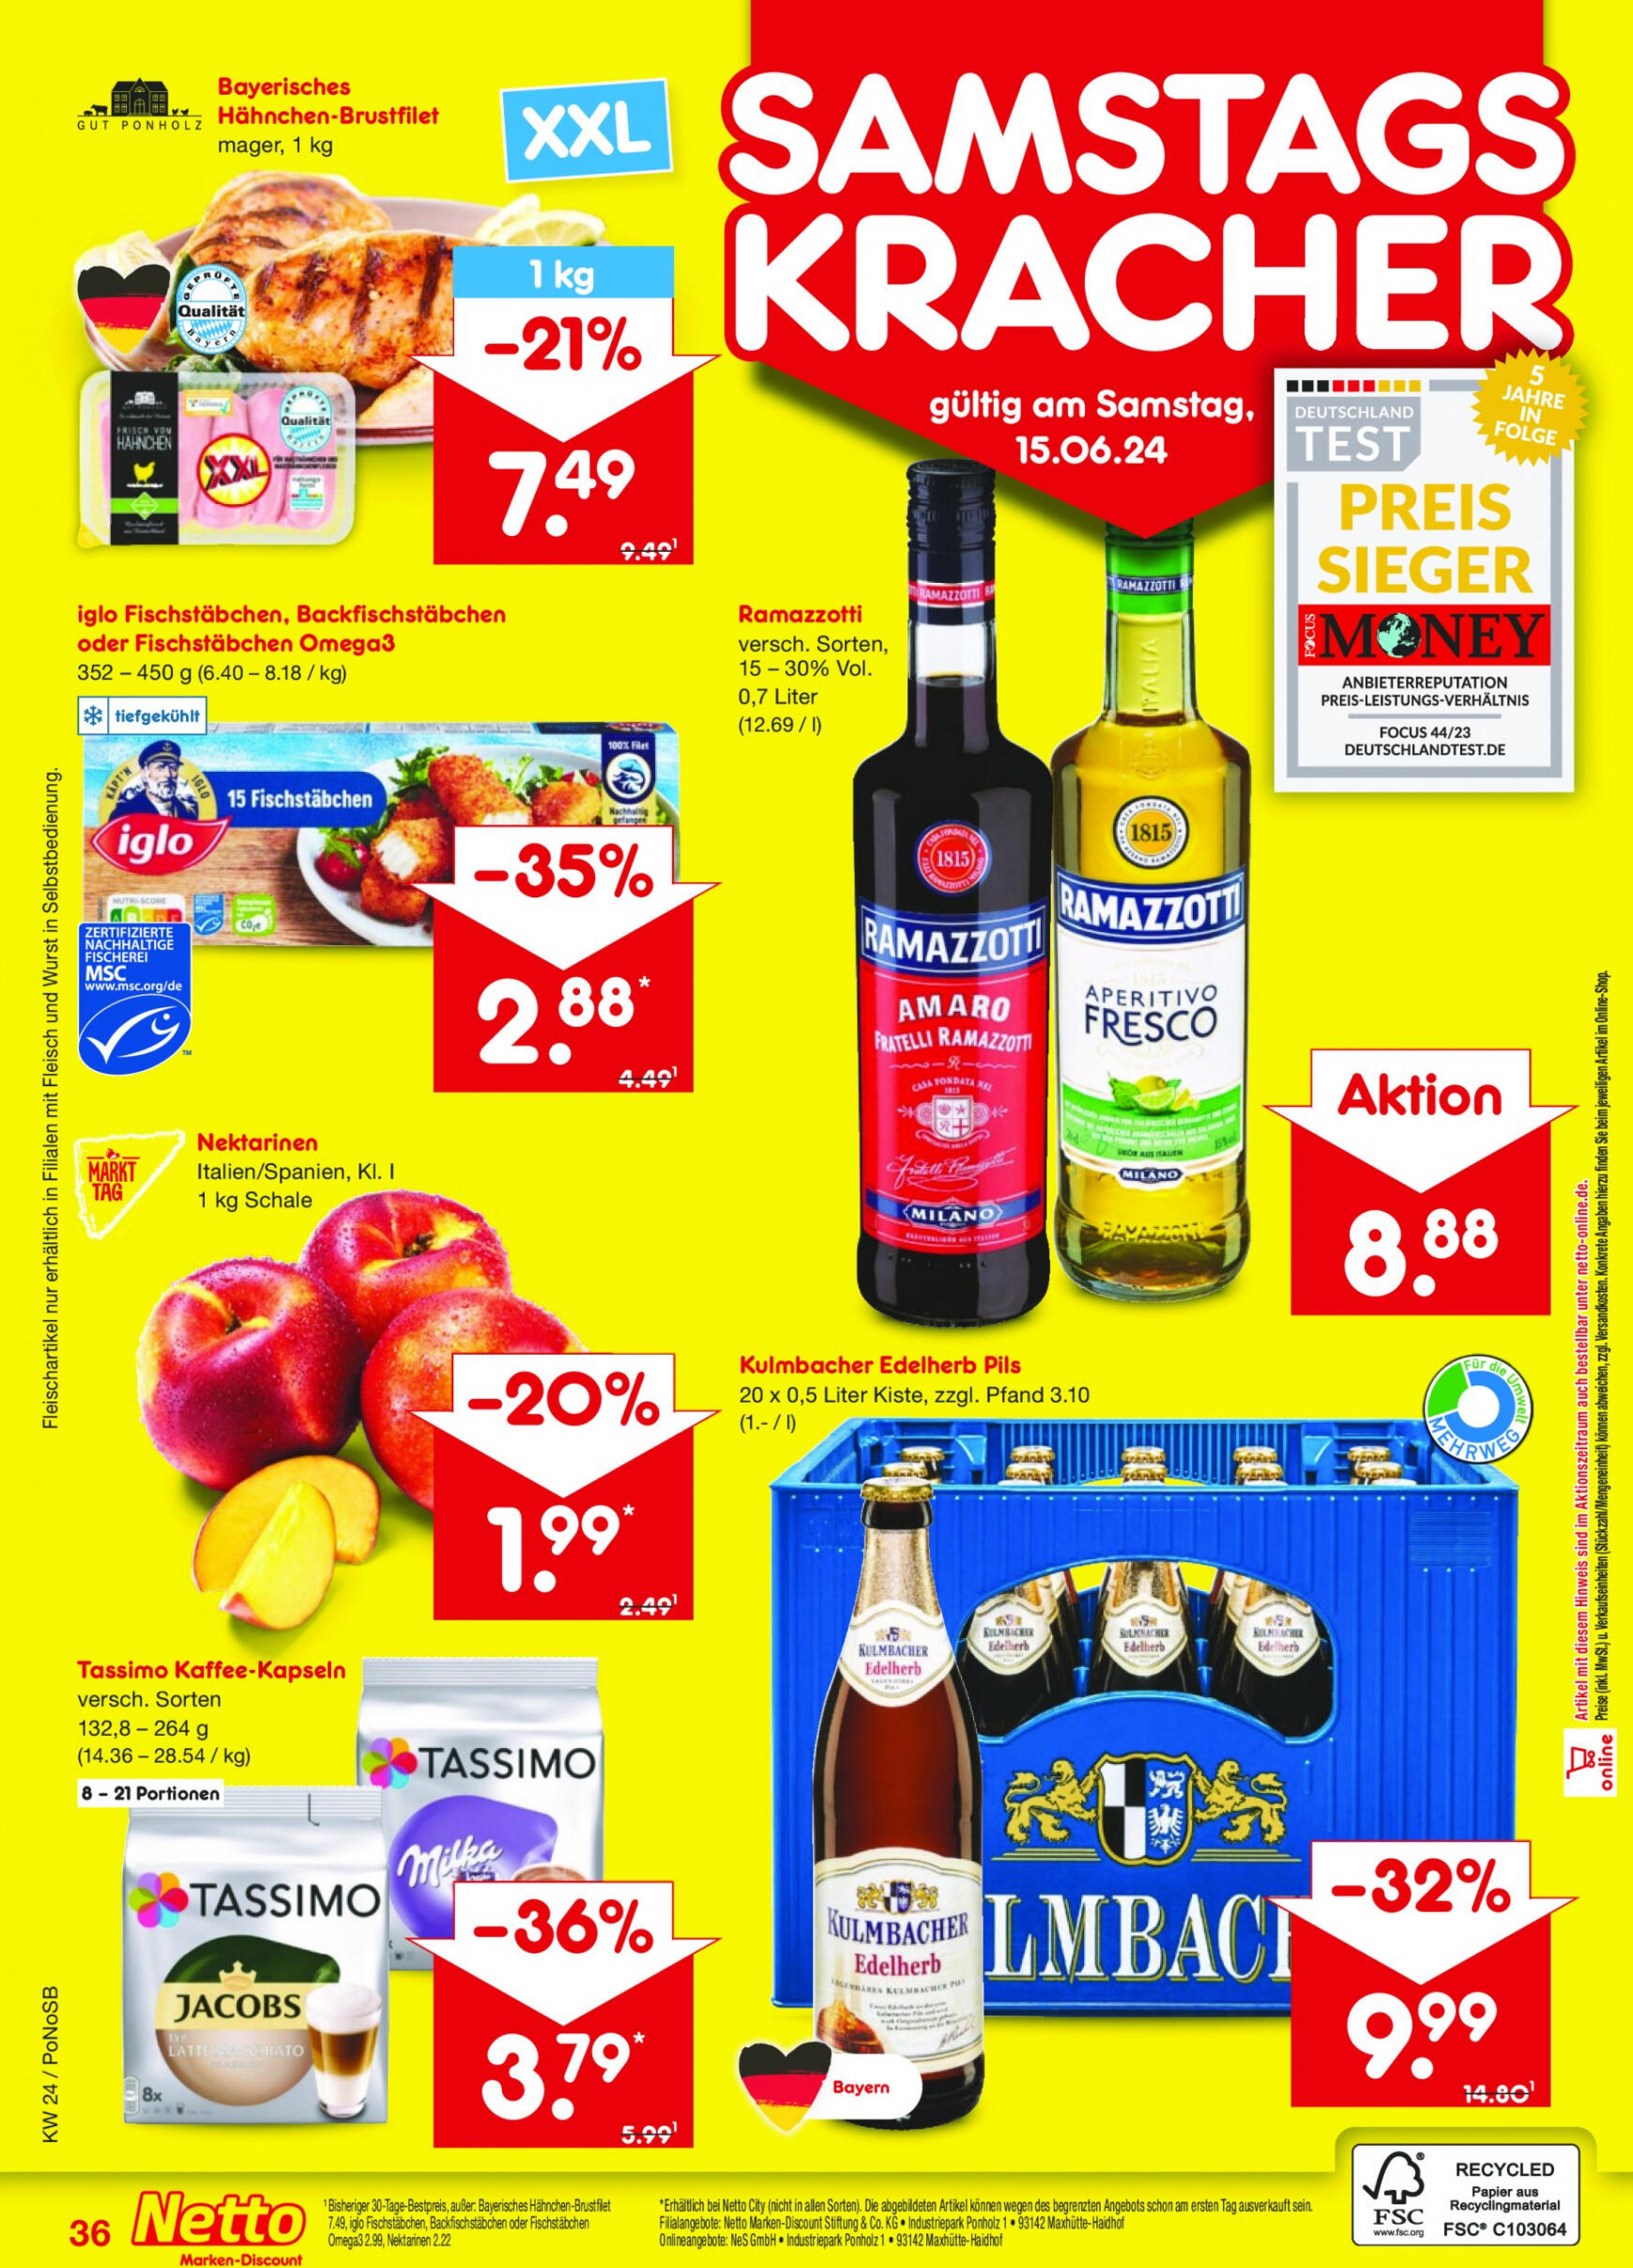 netto - Flyer Netto aktuell 10.06. - 15.06. - page: 52